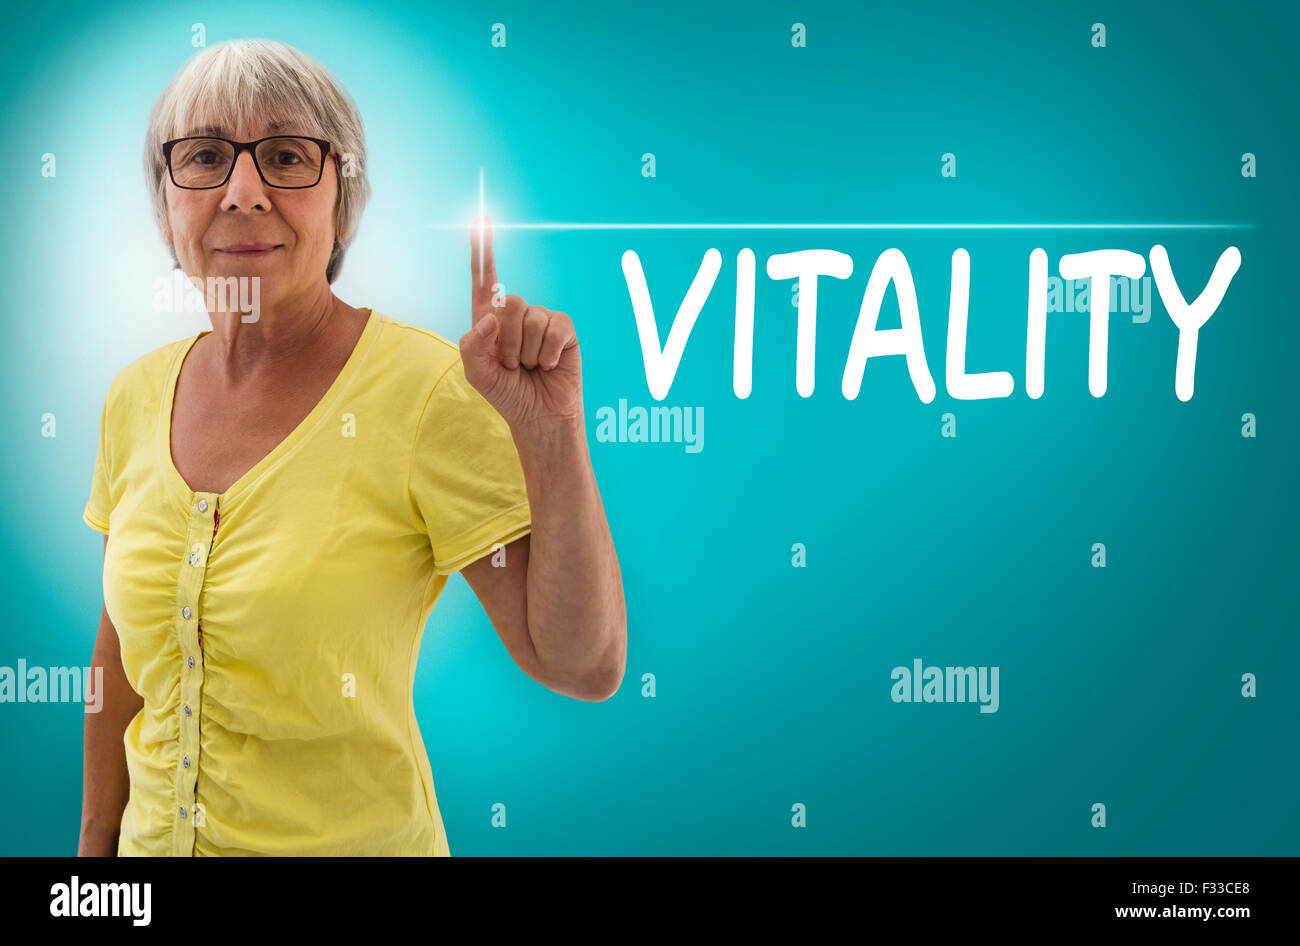 Vitality touchscreen is shown by Senior woman concept. Stock Photo